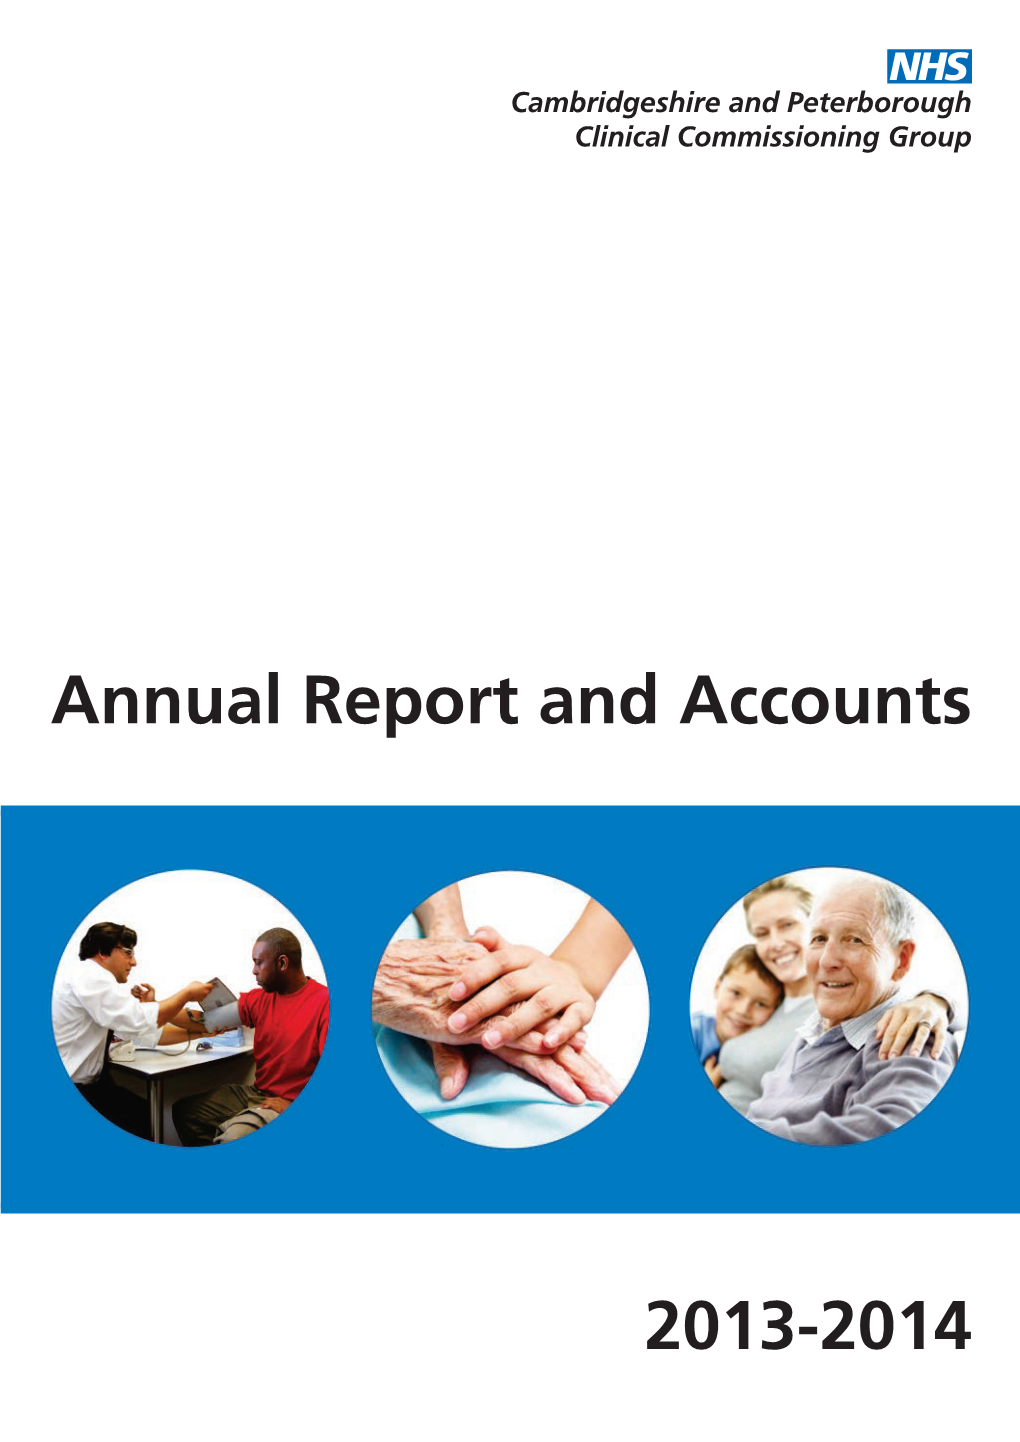 Annual Report and Accounts 2013-2014